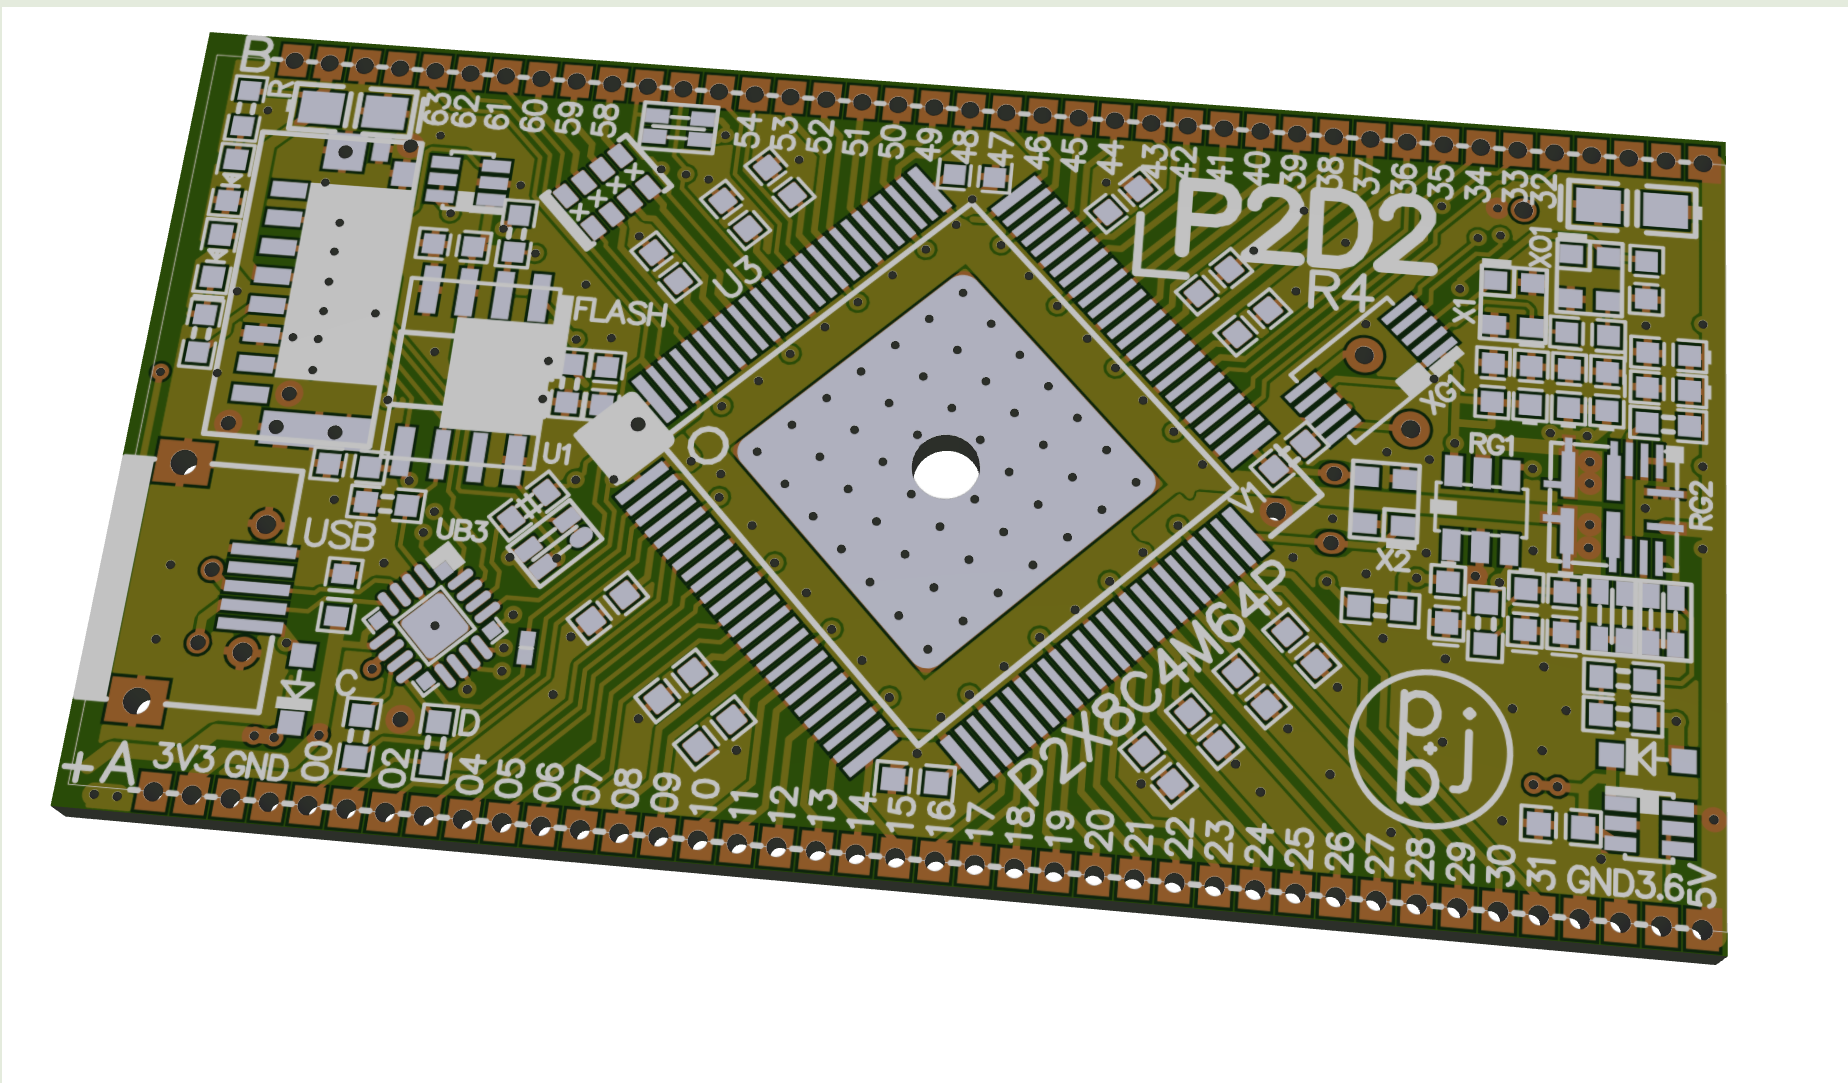 P2D2r4%20SMD%20PCB%203D.png